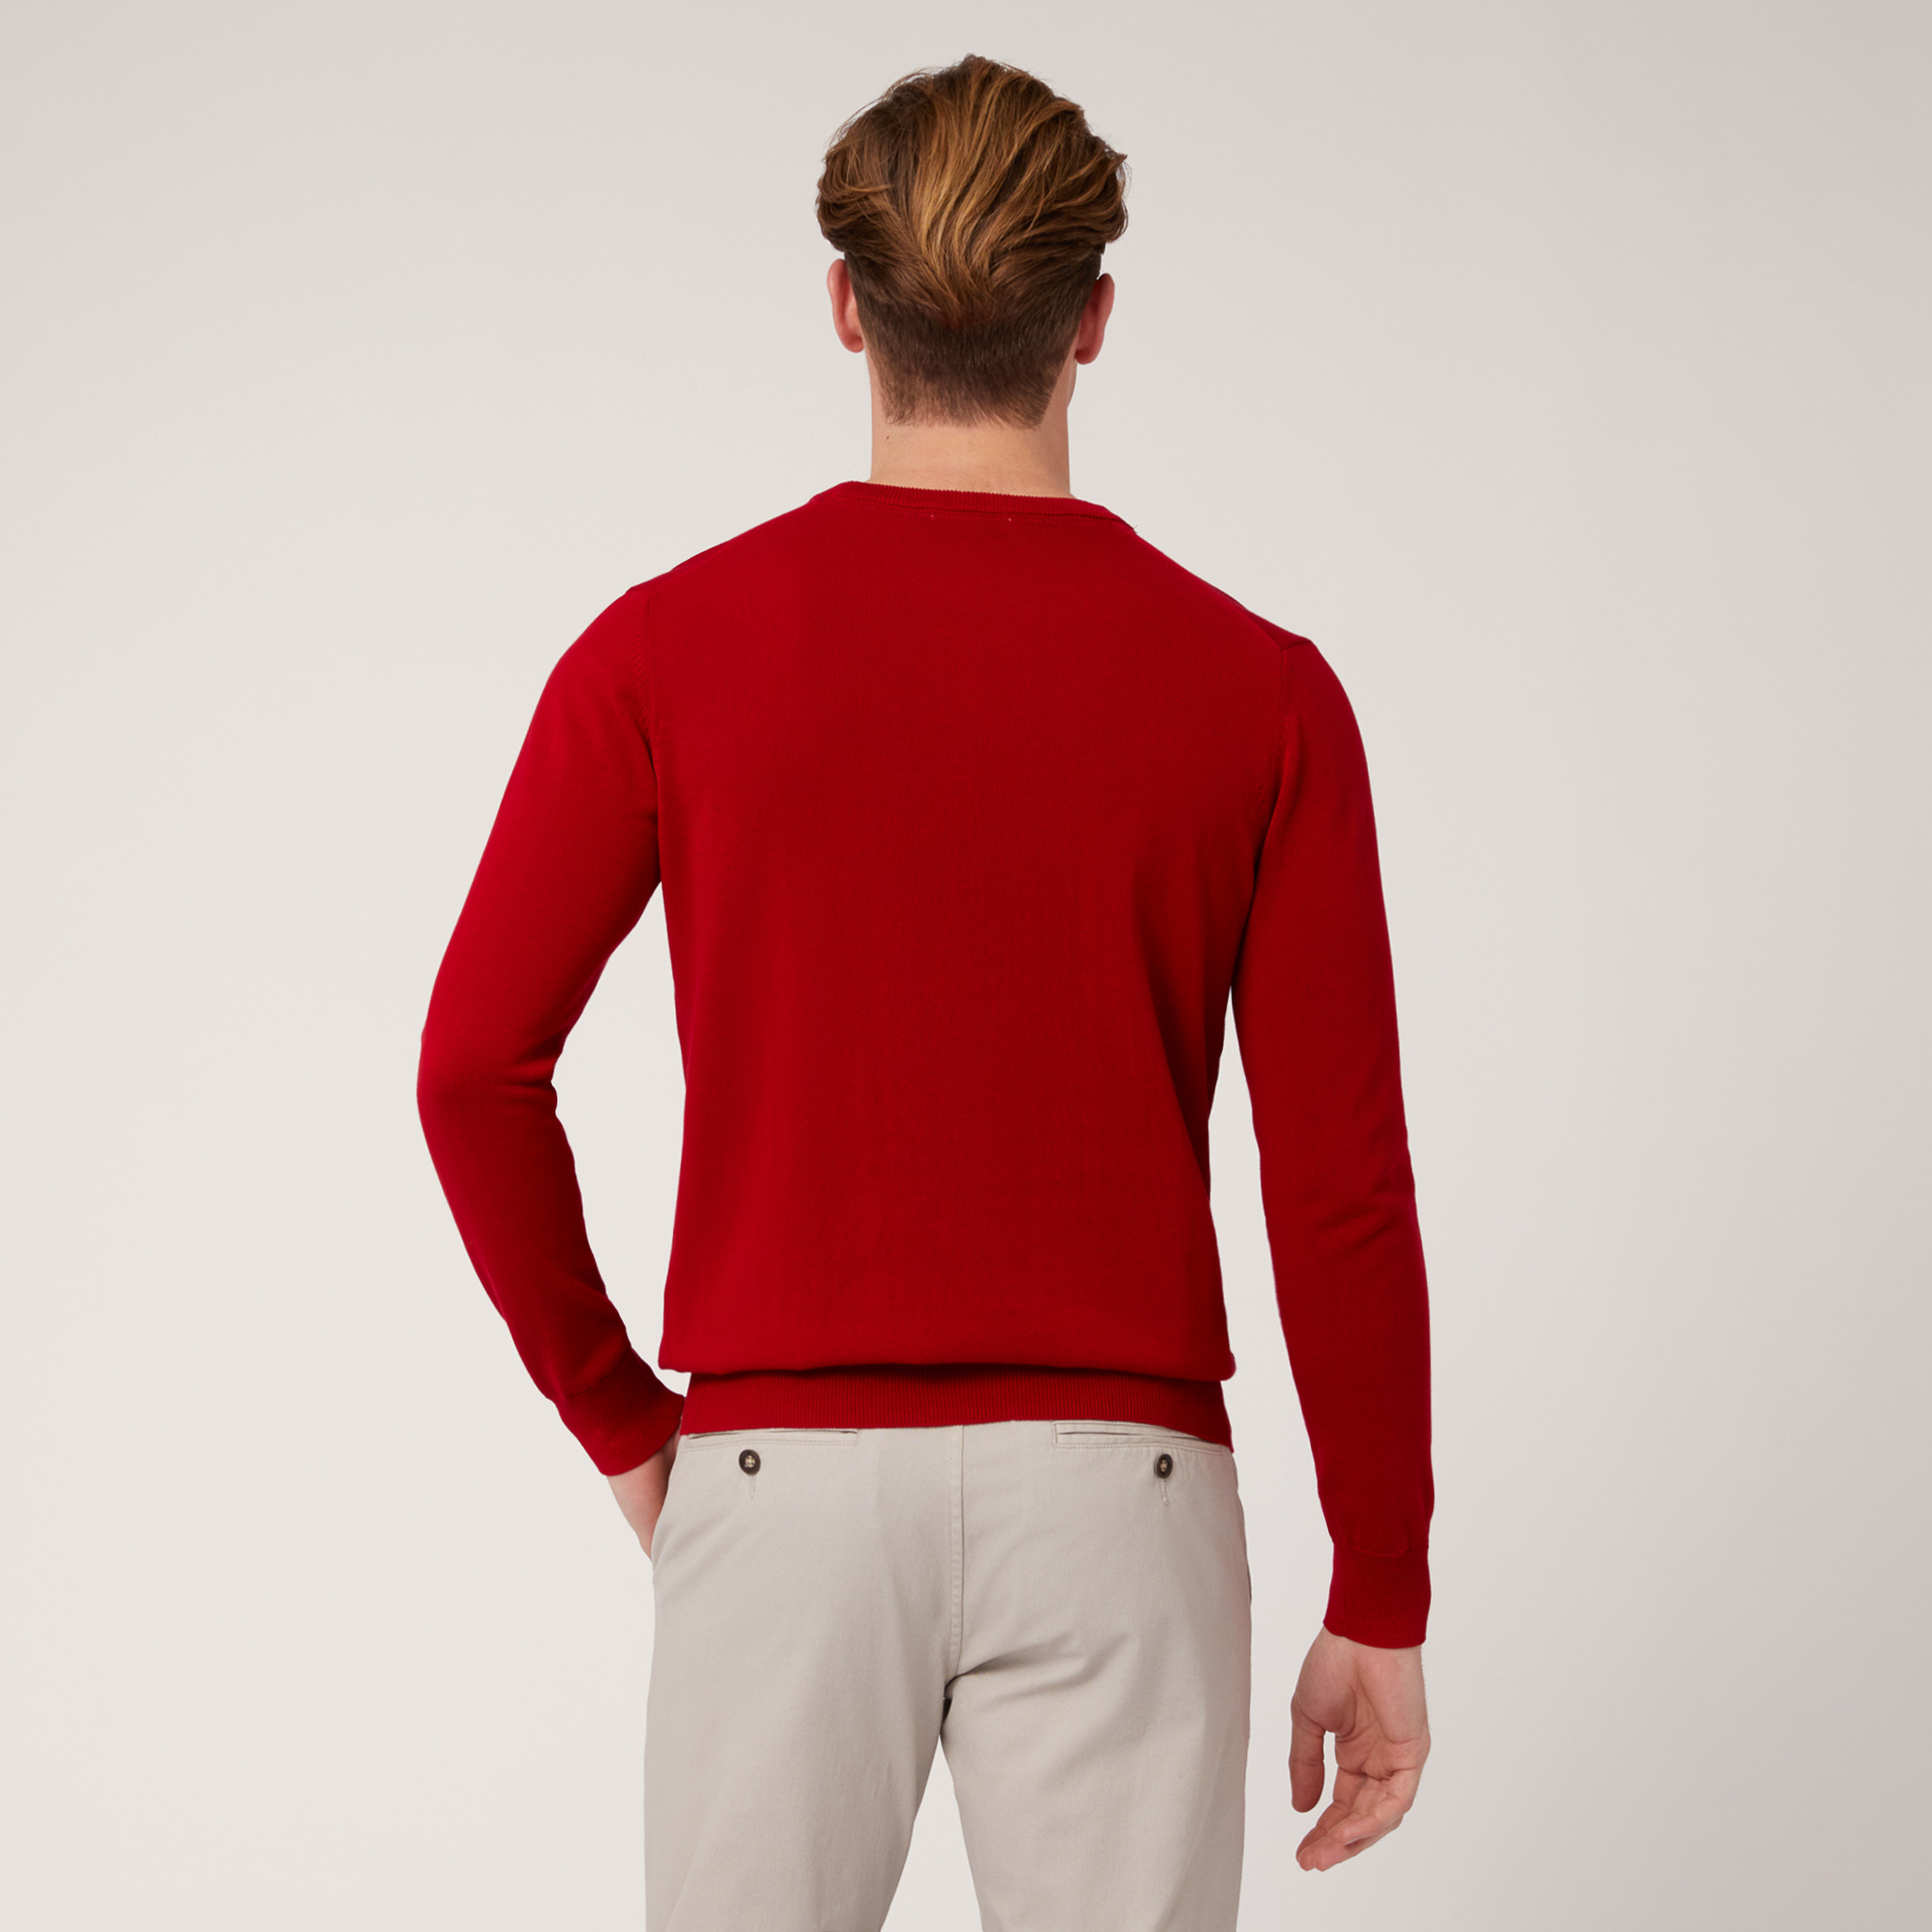 Pullover Girocollo In Cotone, Rosso, large image number 1